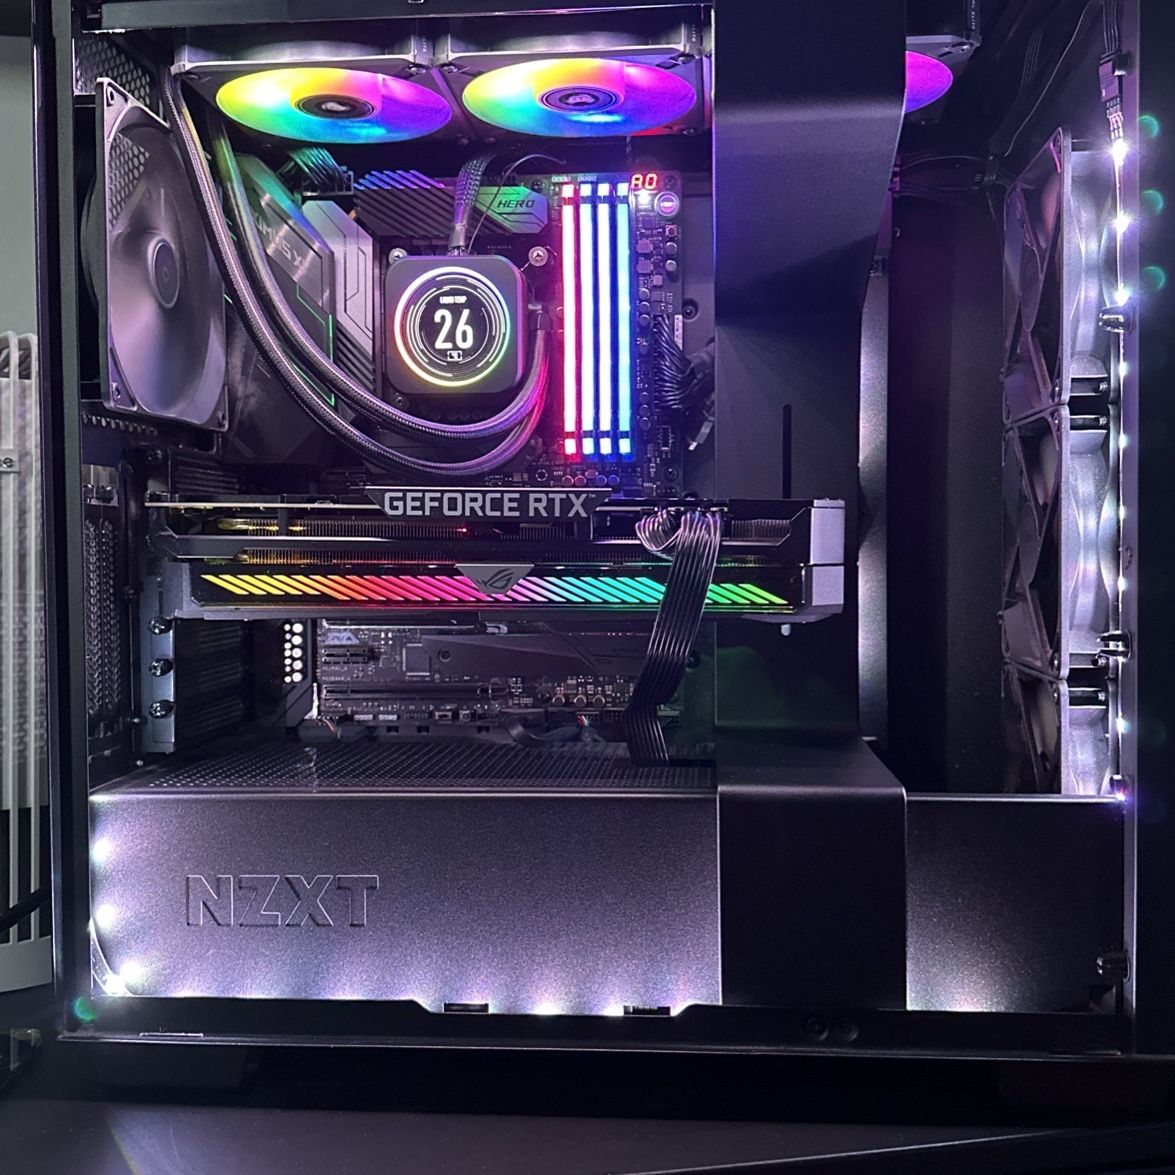 NZXT Gaming PC Amazing Condition With 2 Gaming Monitors